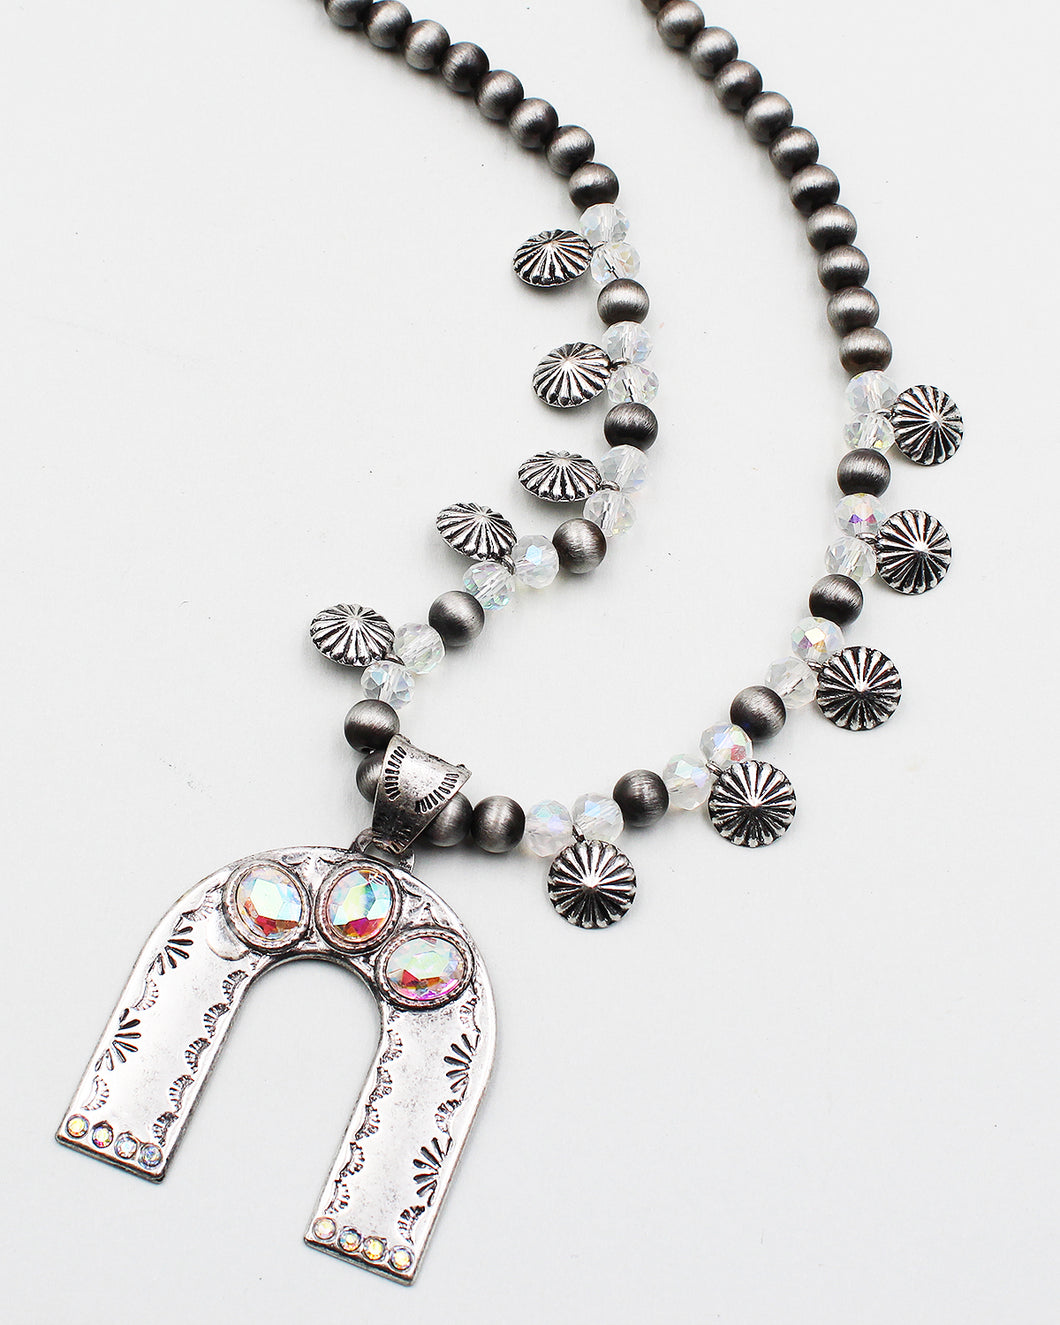 Navajo Pearl Beaded Necklace with Horseshoe Pendant